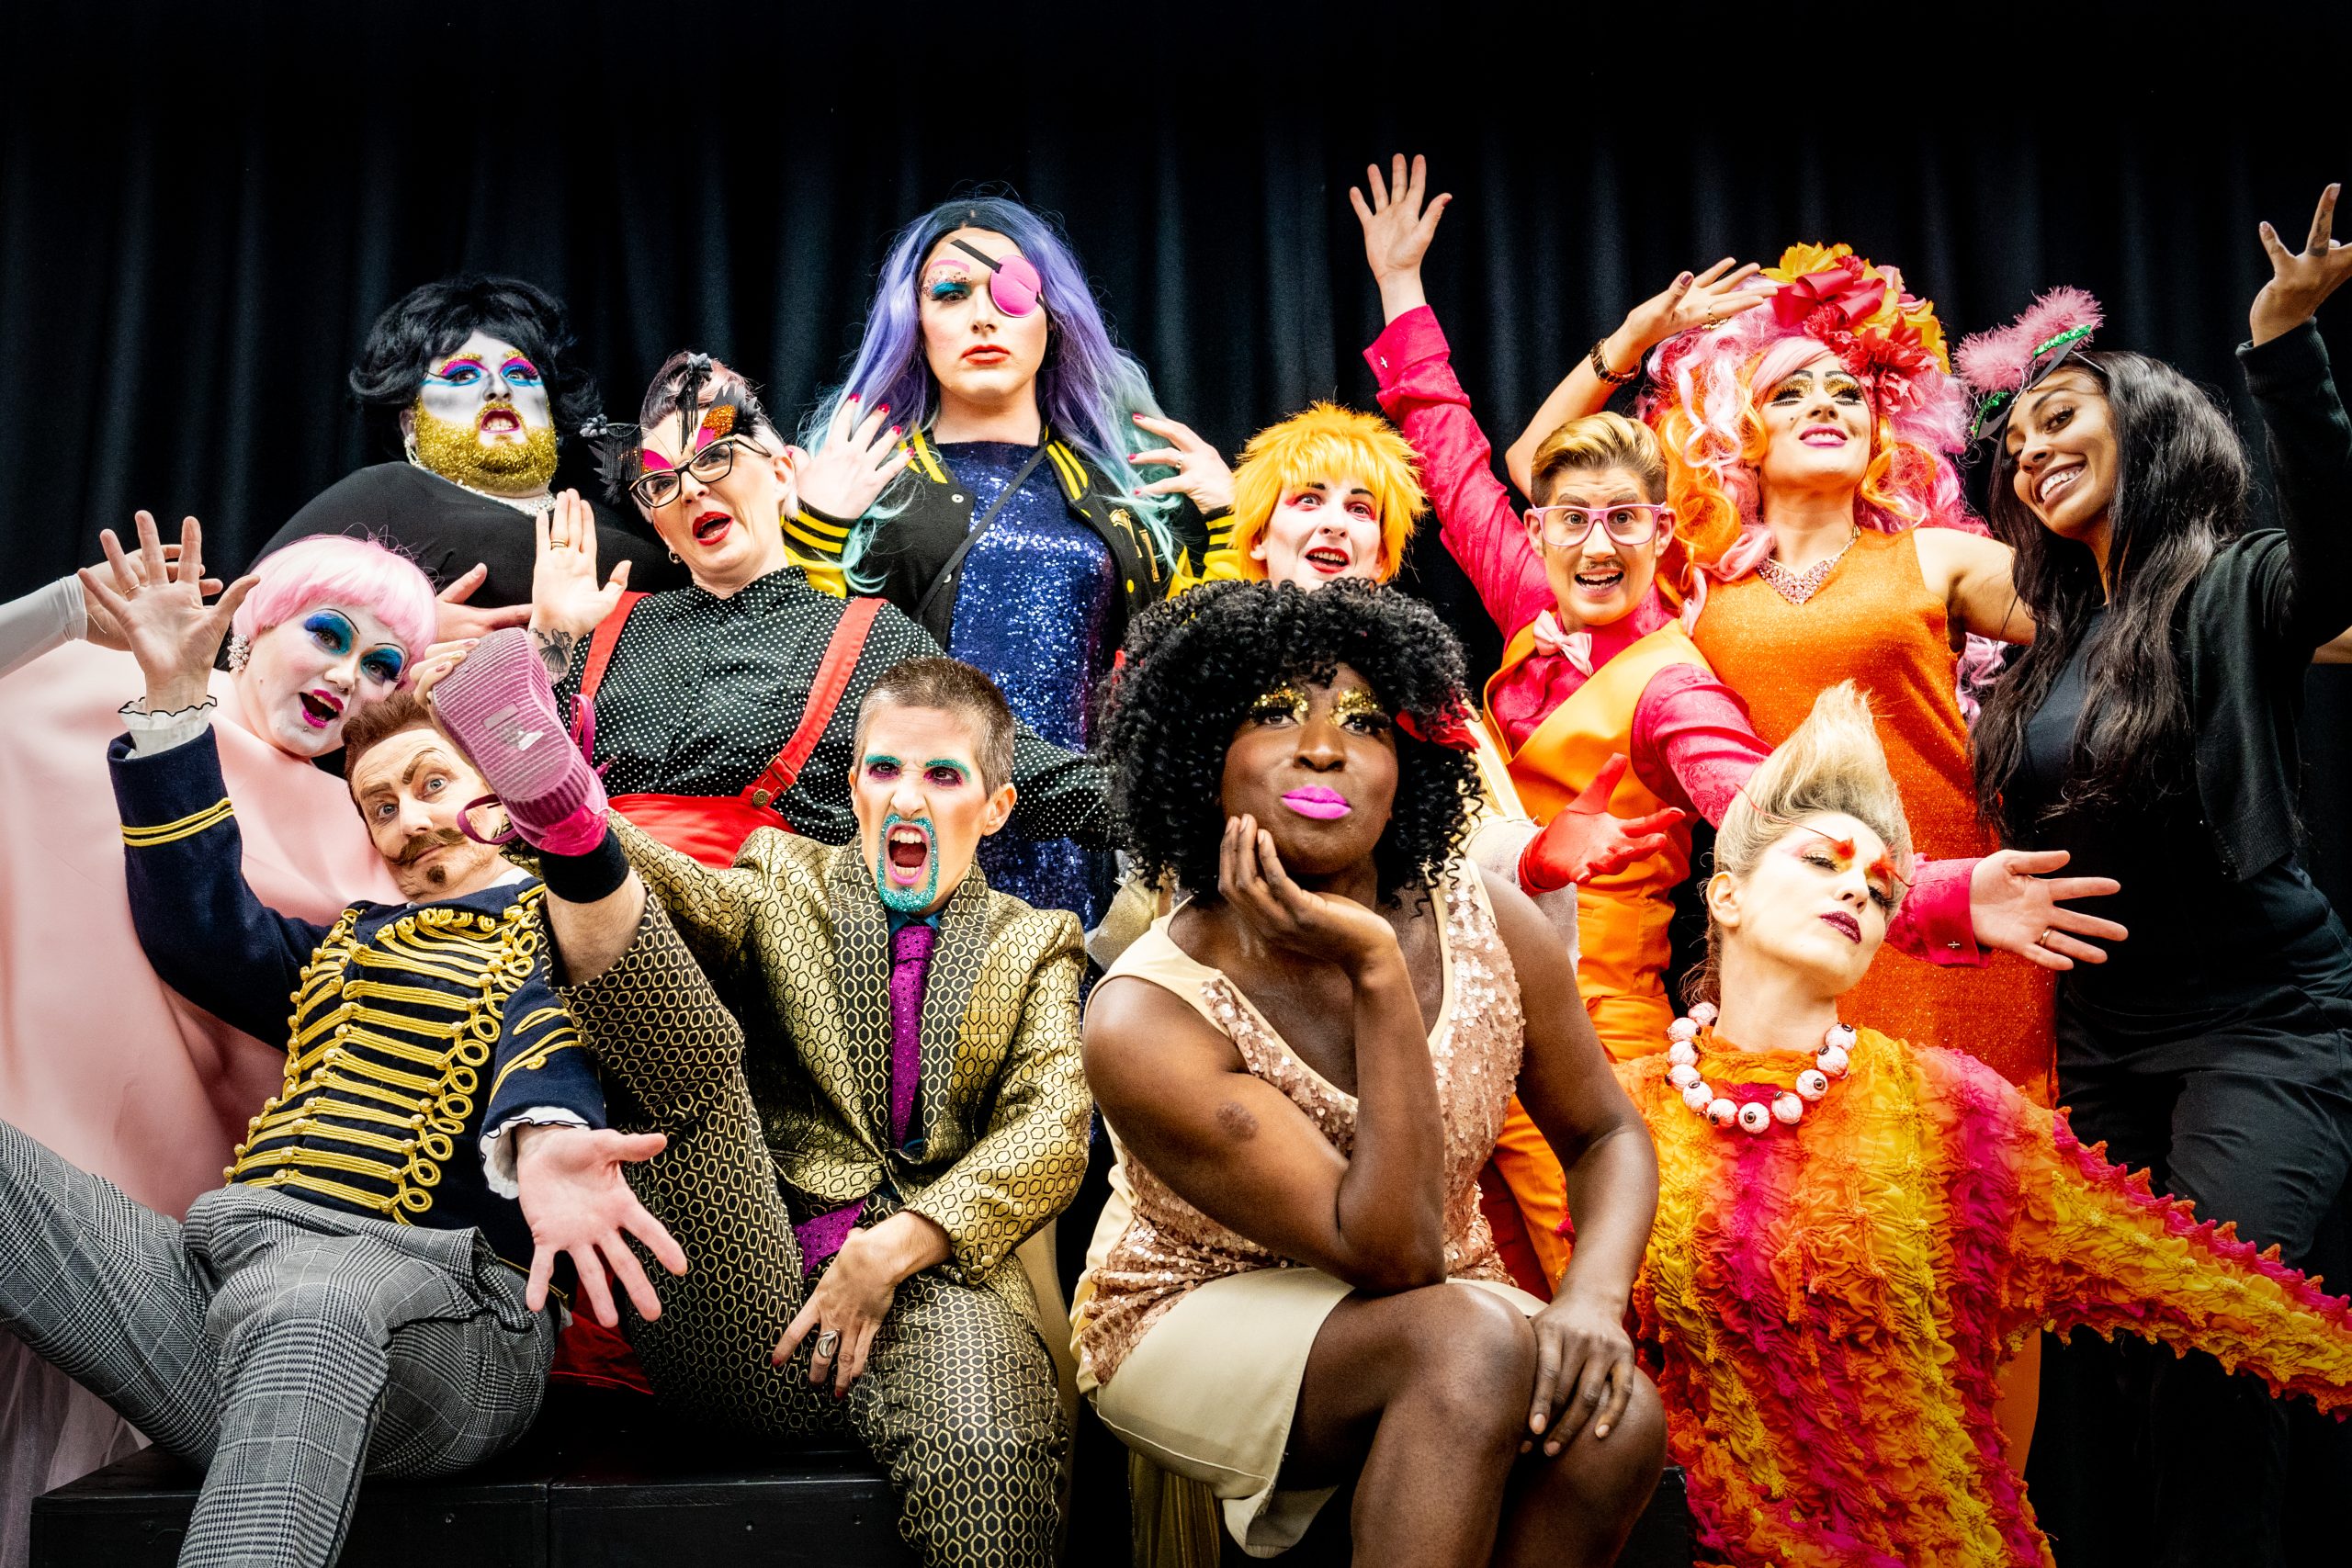 A celebratory group shot of visually impaired drag artists, all dressed in a variety of colourful and outlandish costumes. Some people pose while others grin and have their hands in the air.